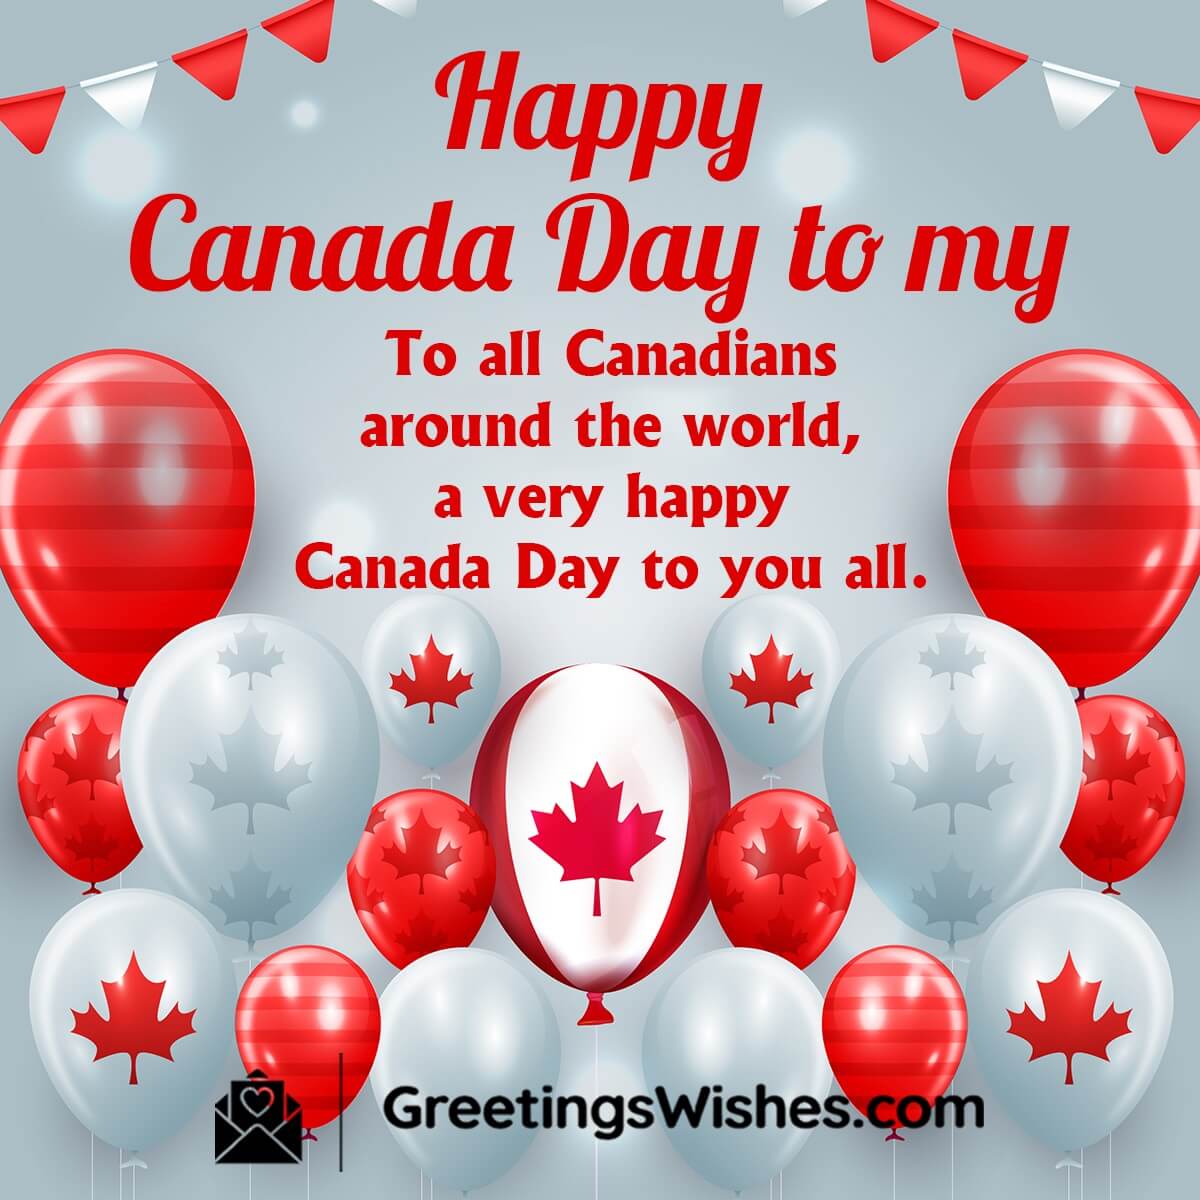 Happy Canada Day To all Canadians